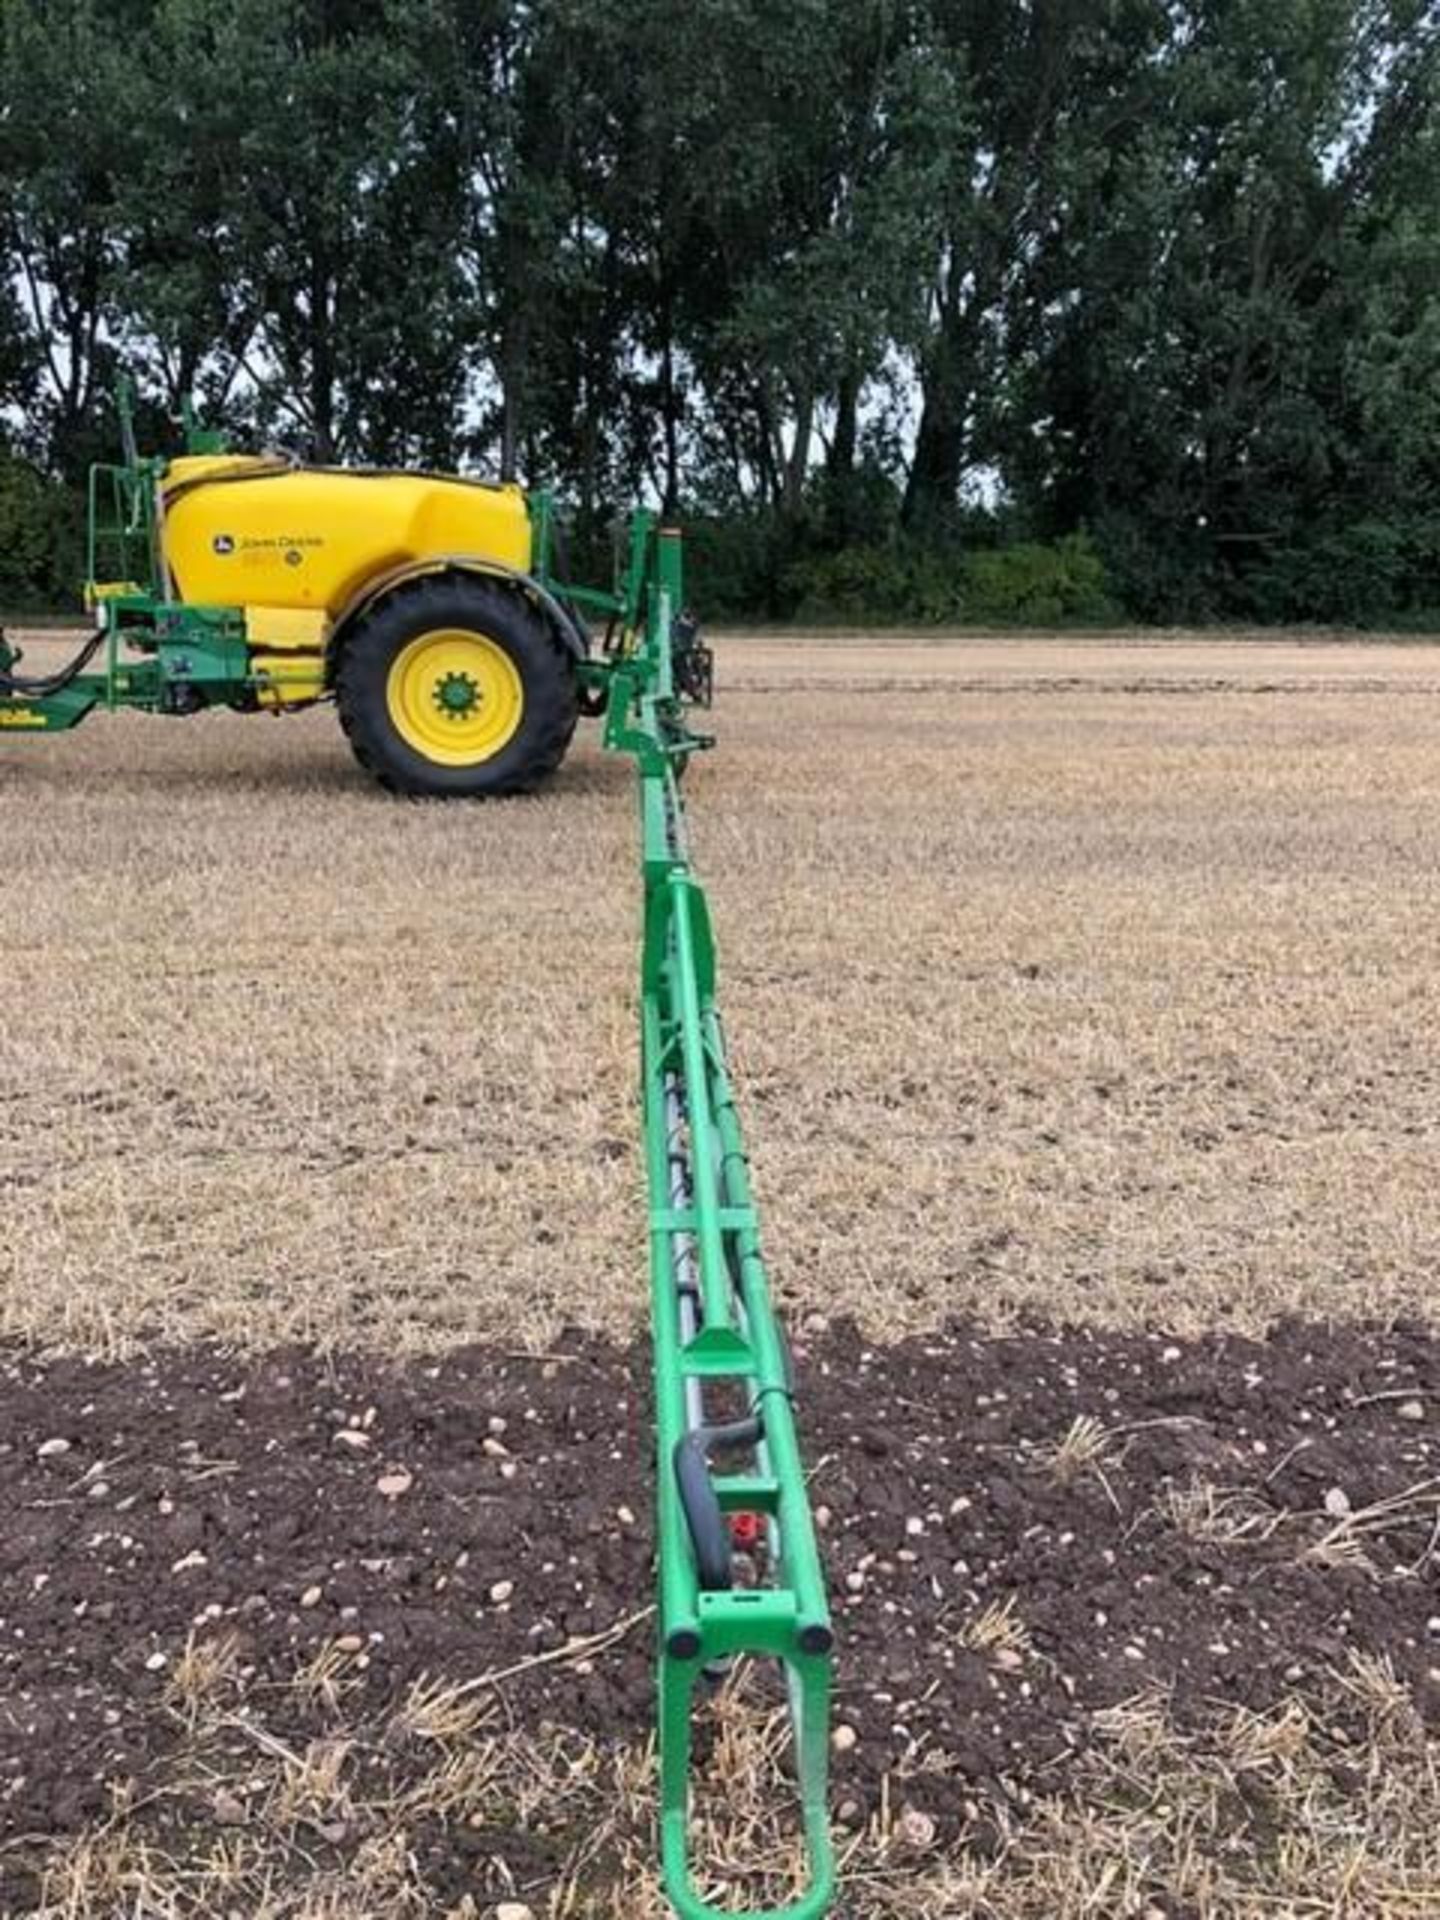 2017 John Deere M740i 24m trailed sprayer, 4000l tank on 520/85R38 wheels and tyres. Hectares: c.12, - Image 5 of 14